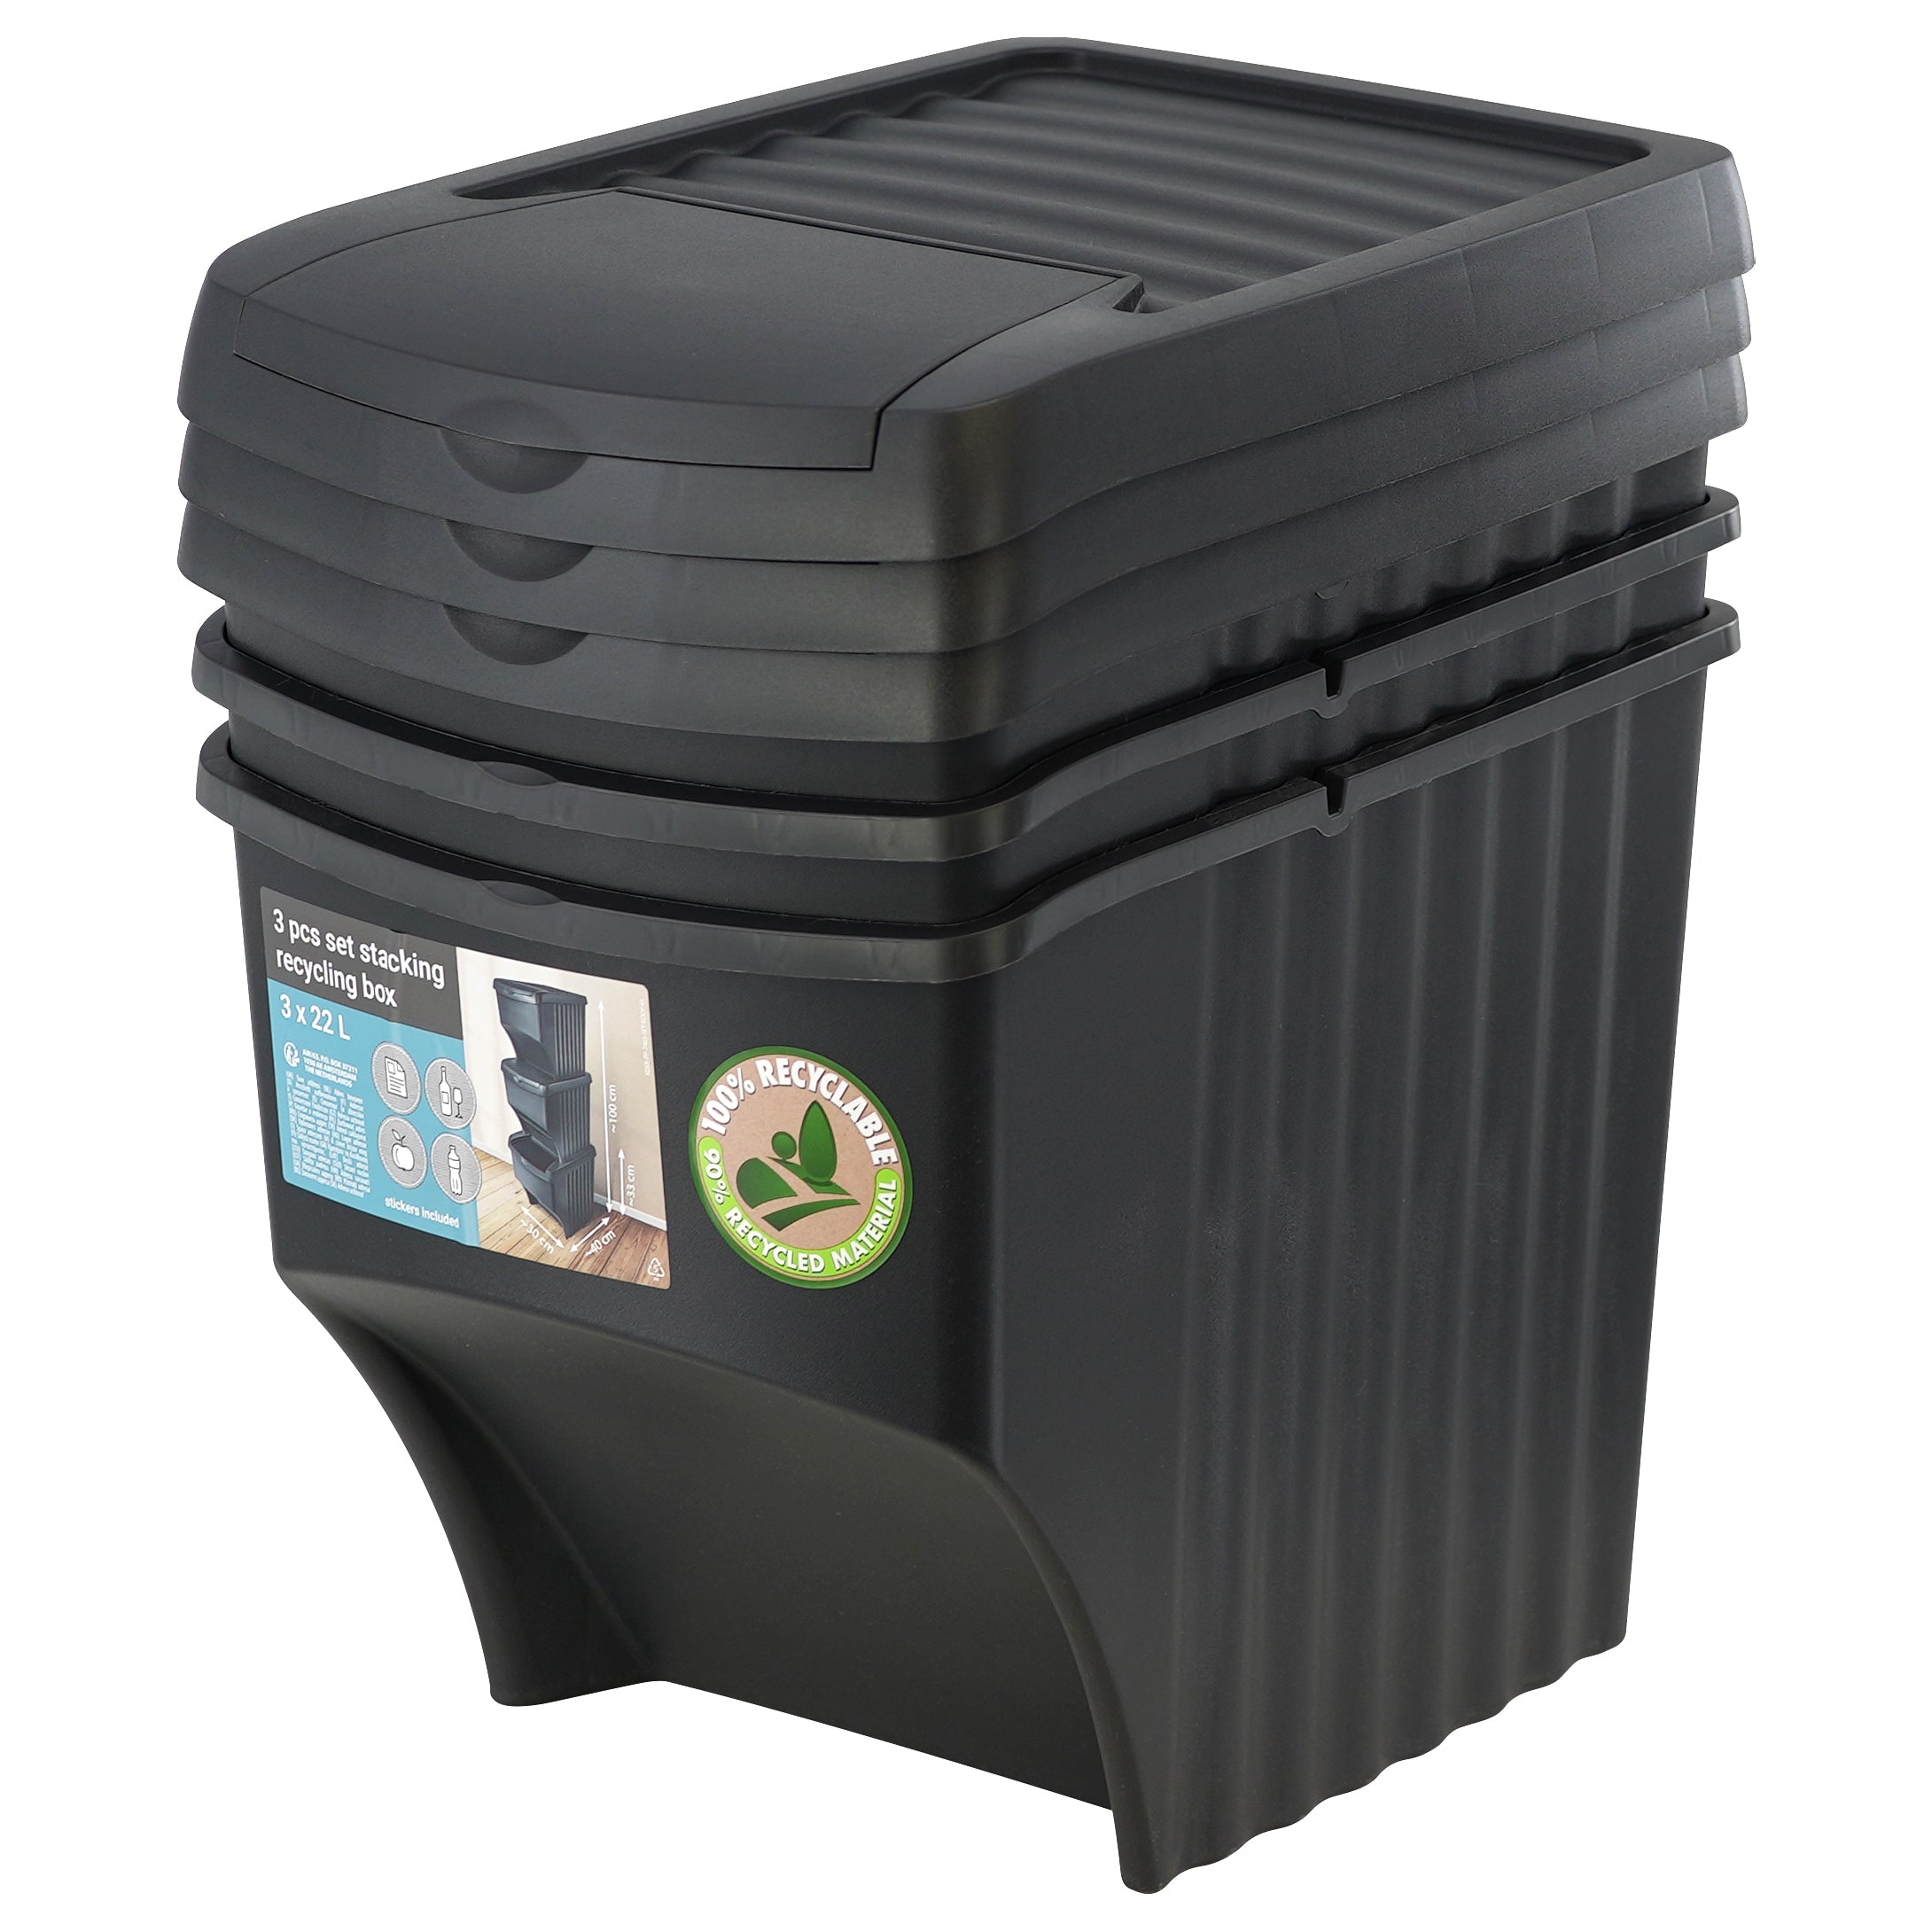 GEEZY Stackable Recycling Waste Bins 25 L set of 3 Large Plastic Waste Recycling Bin With Lids